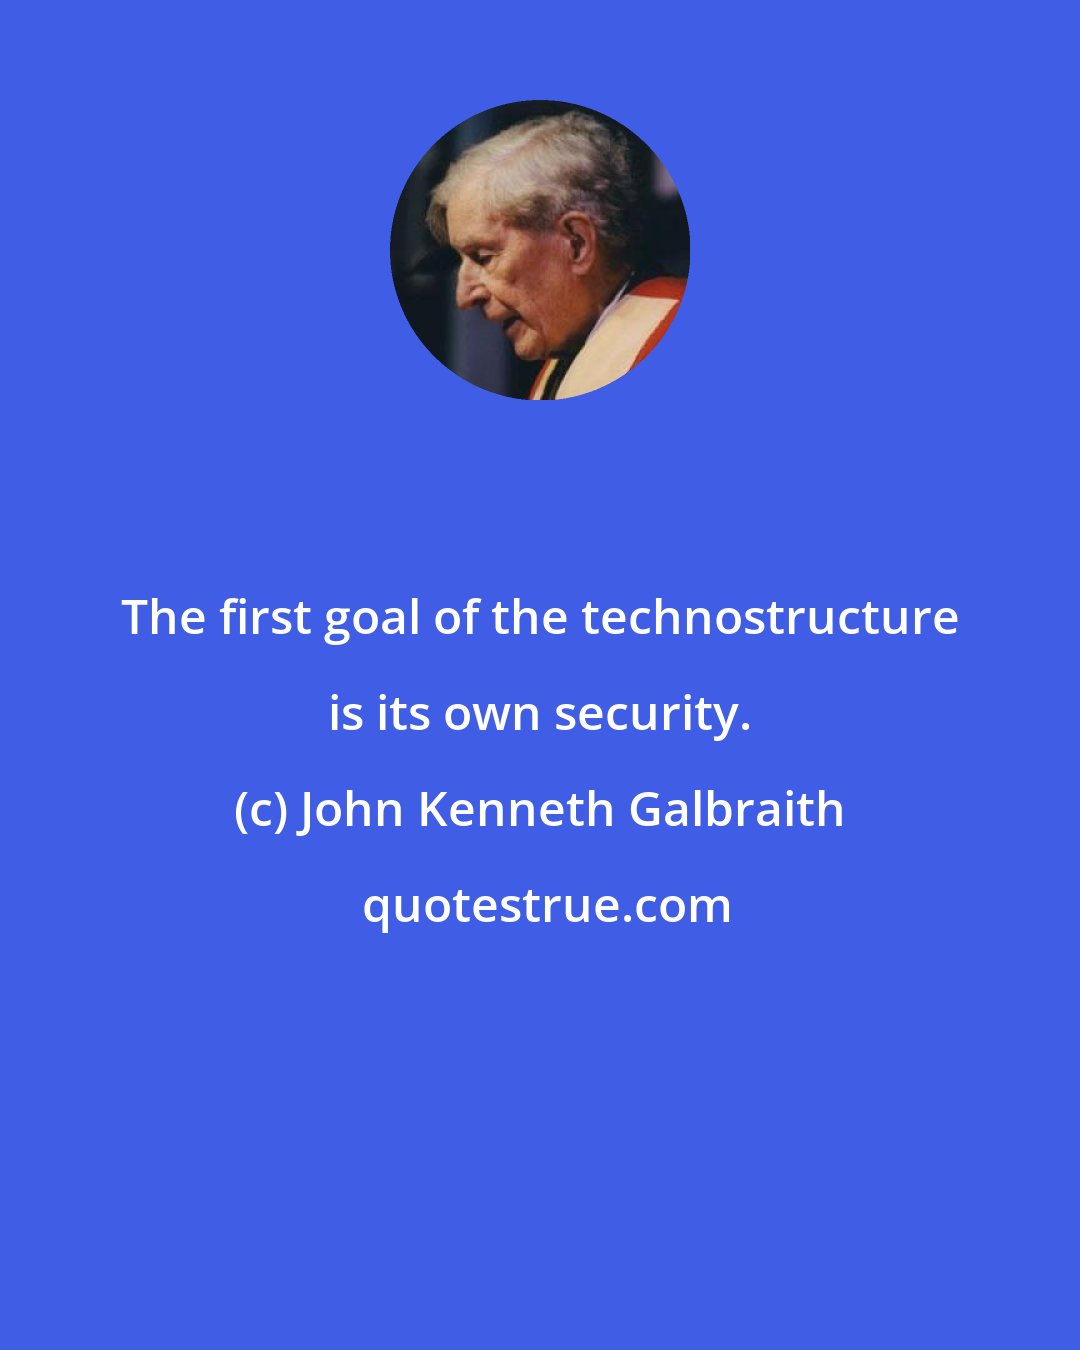 John Kenneth Galbraith: The first goal of the technostructure is its own security.